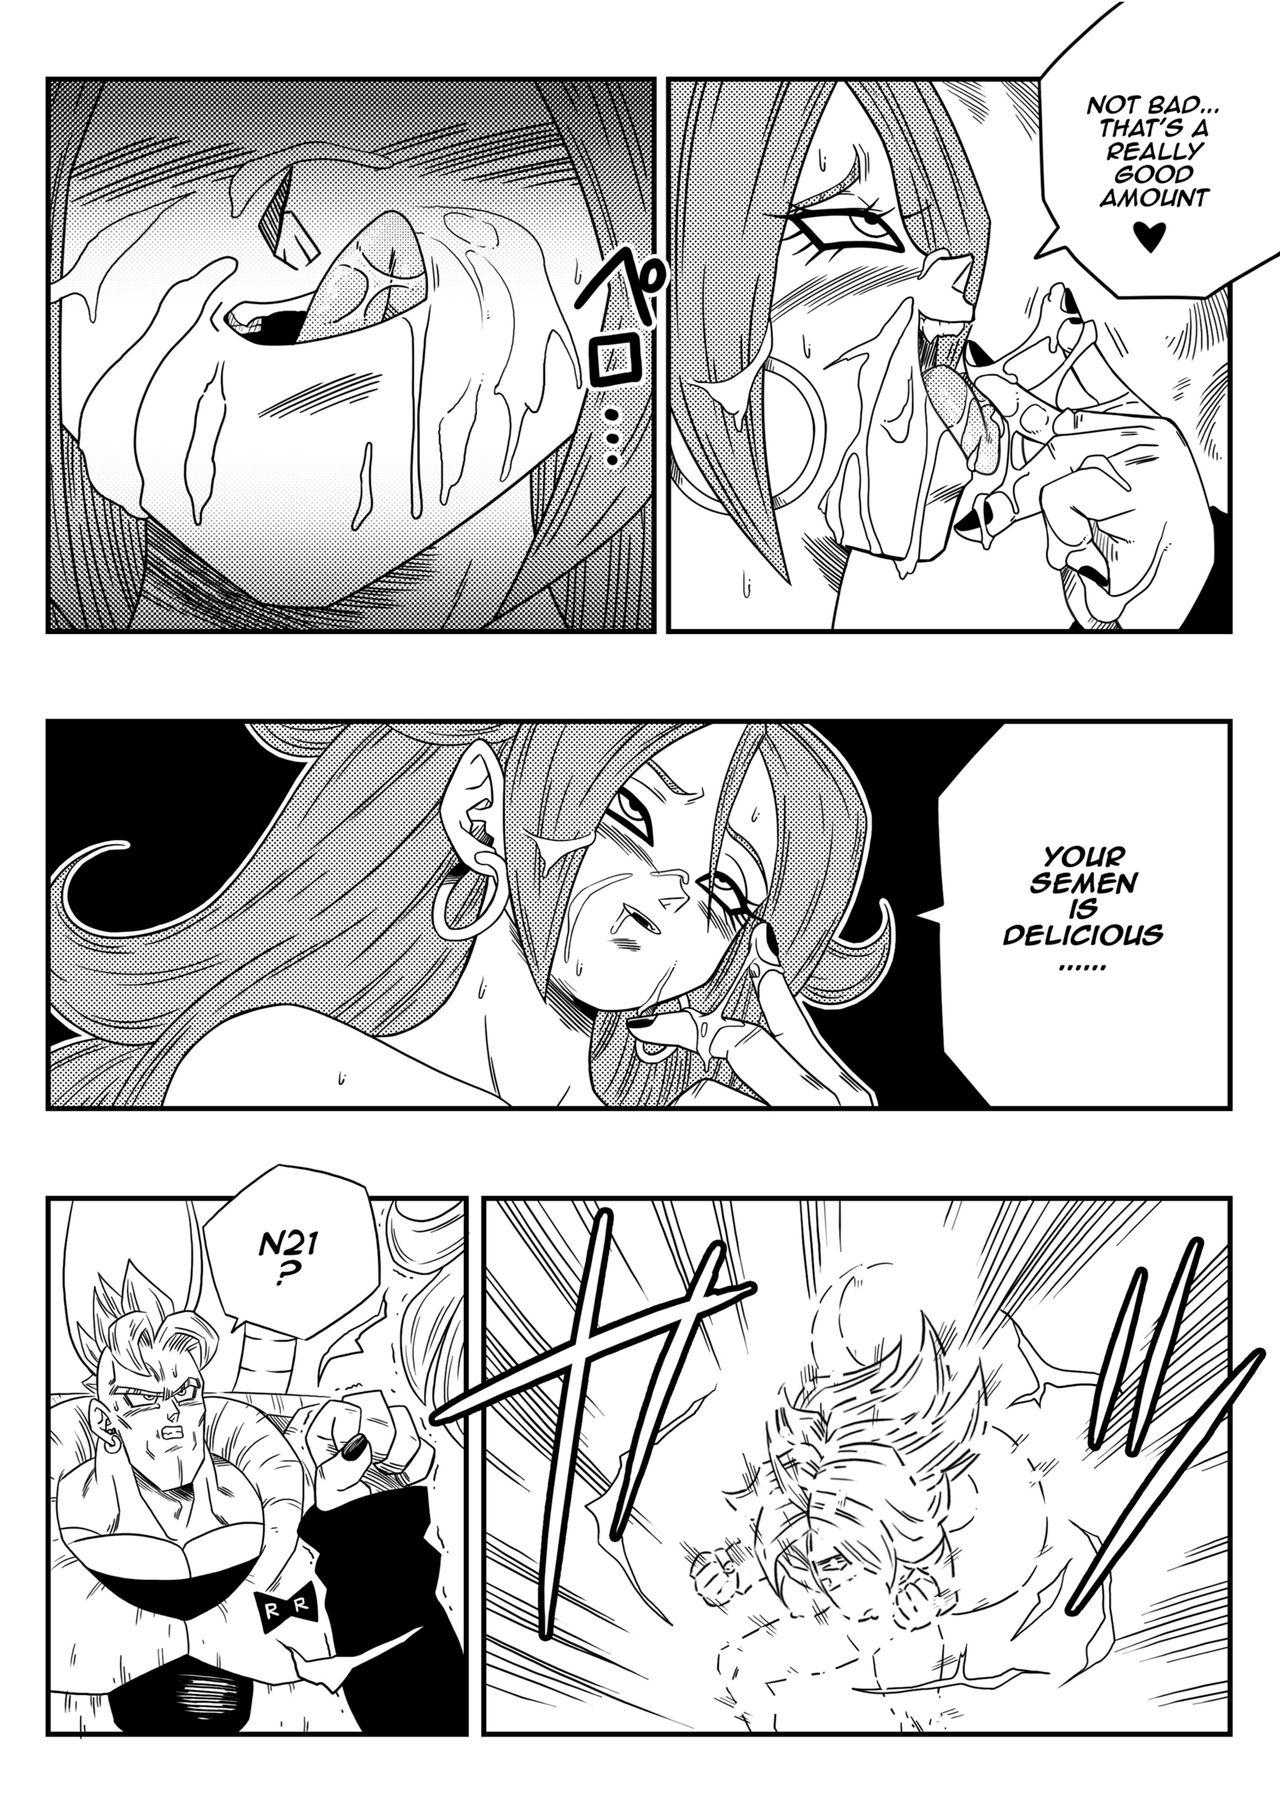 Neighbor Kyonyuu Android Sekai Seiha o Netsubou!! Android 21 Shutsugen!! | Busty Android Wants to Dominate the World! - Dragon ball Cumshots - Page 9